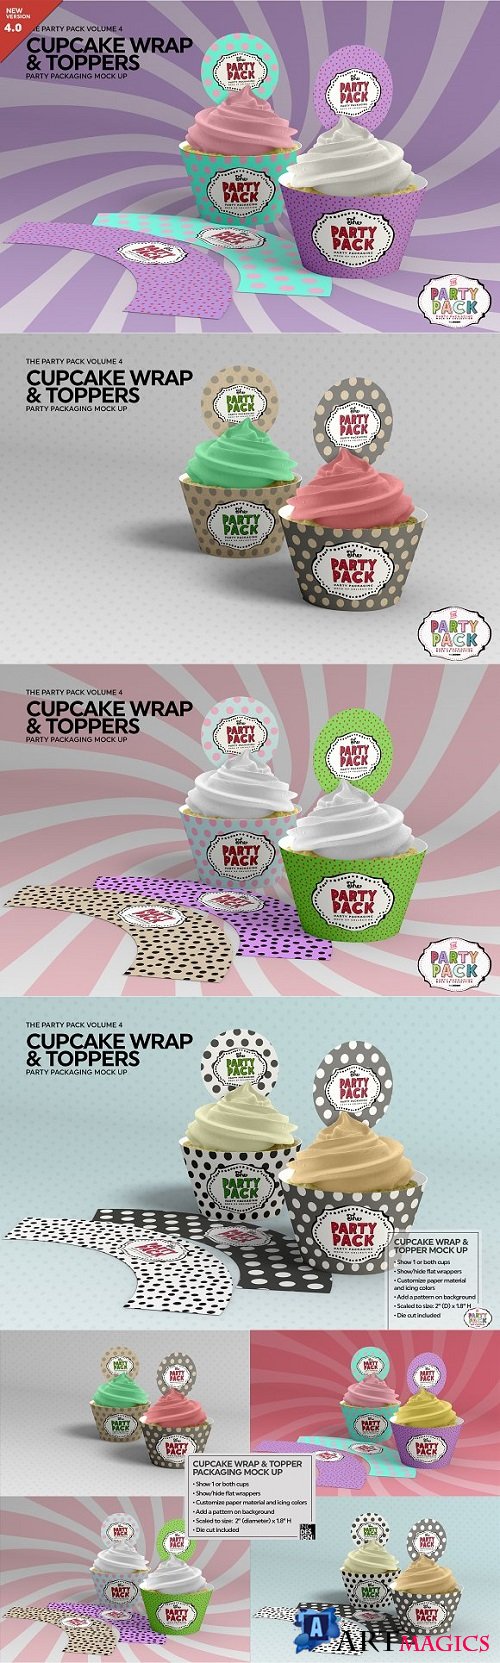 Cupcake Wrap and Topper Mock Up - 2199335